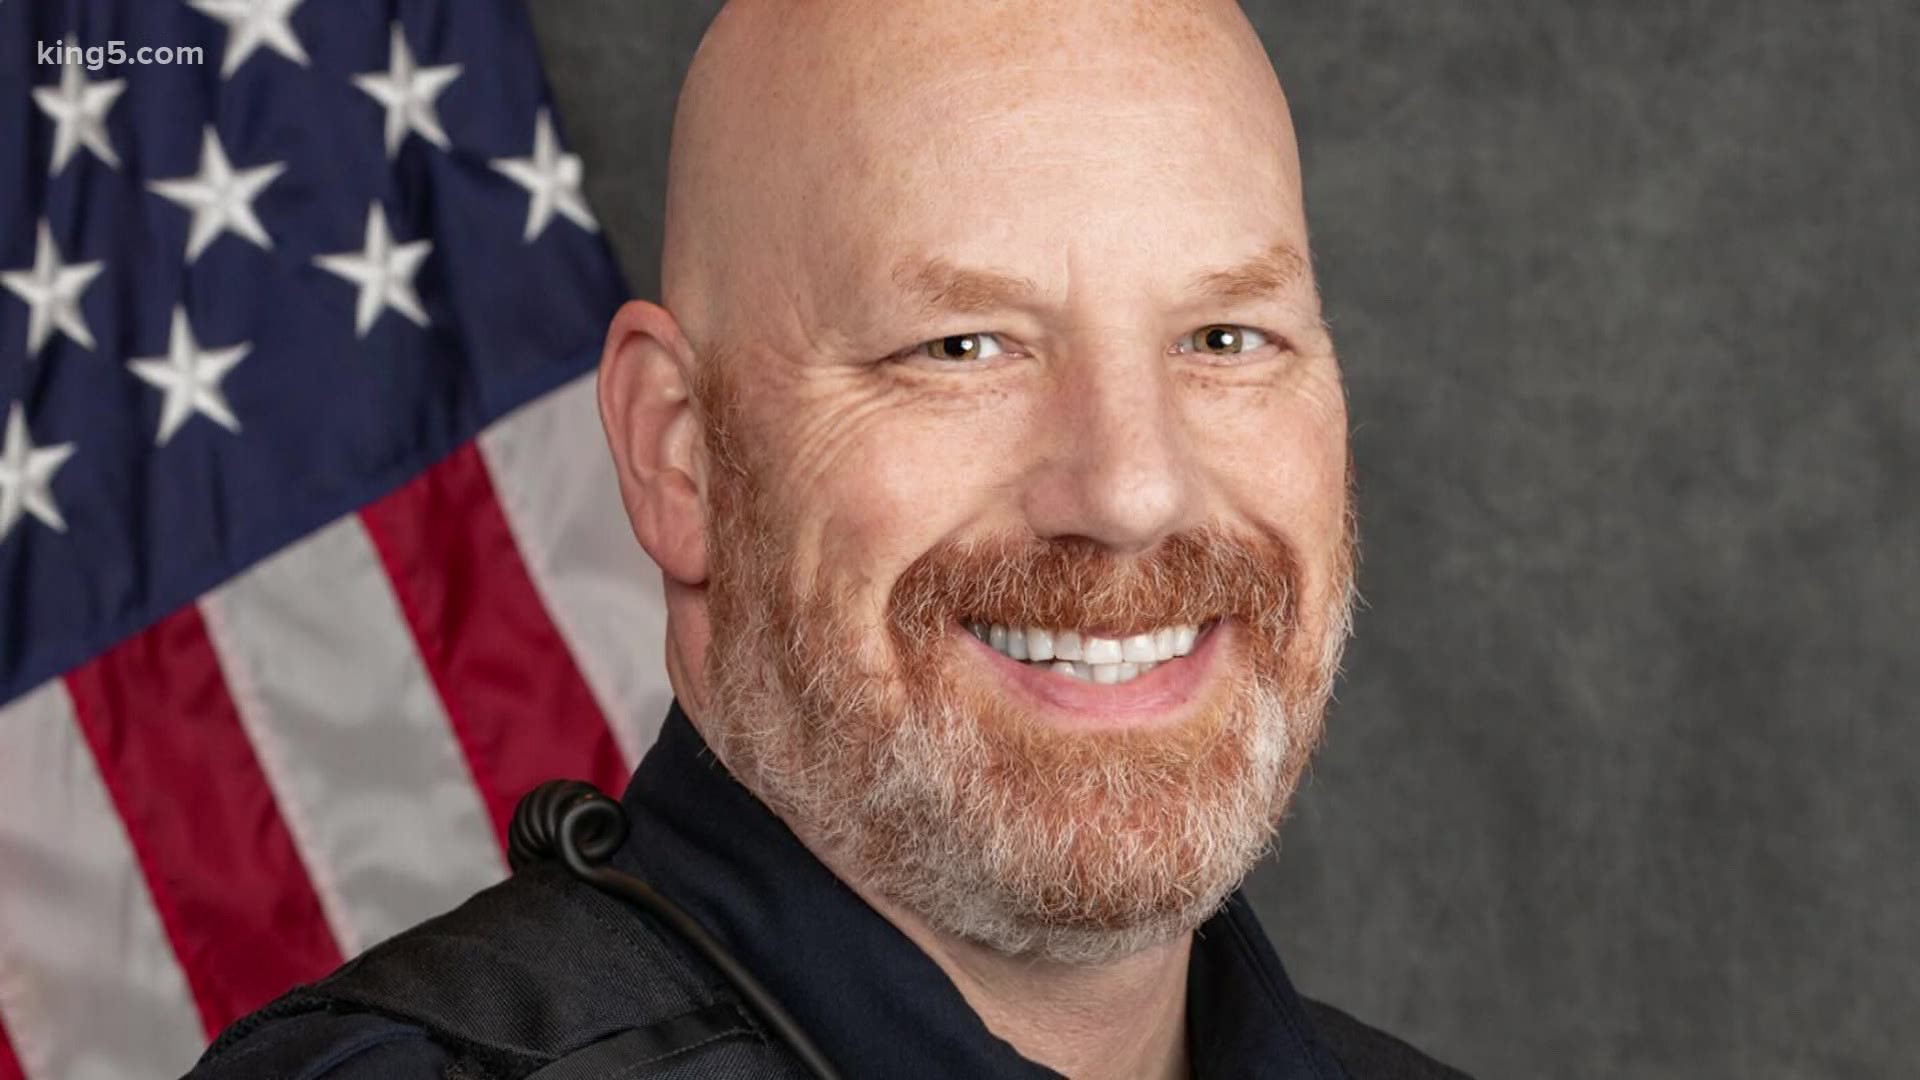 Officer Kurt Enget died early this morning in the hospital after showing symptoms similar to COVID-19. His cause of death was not confirmed.